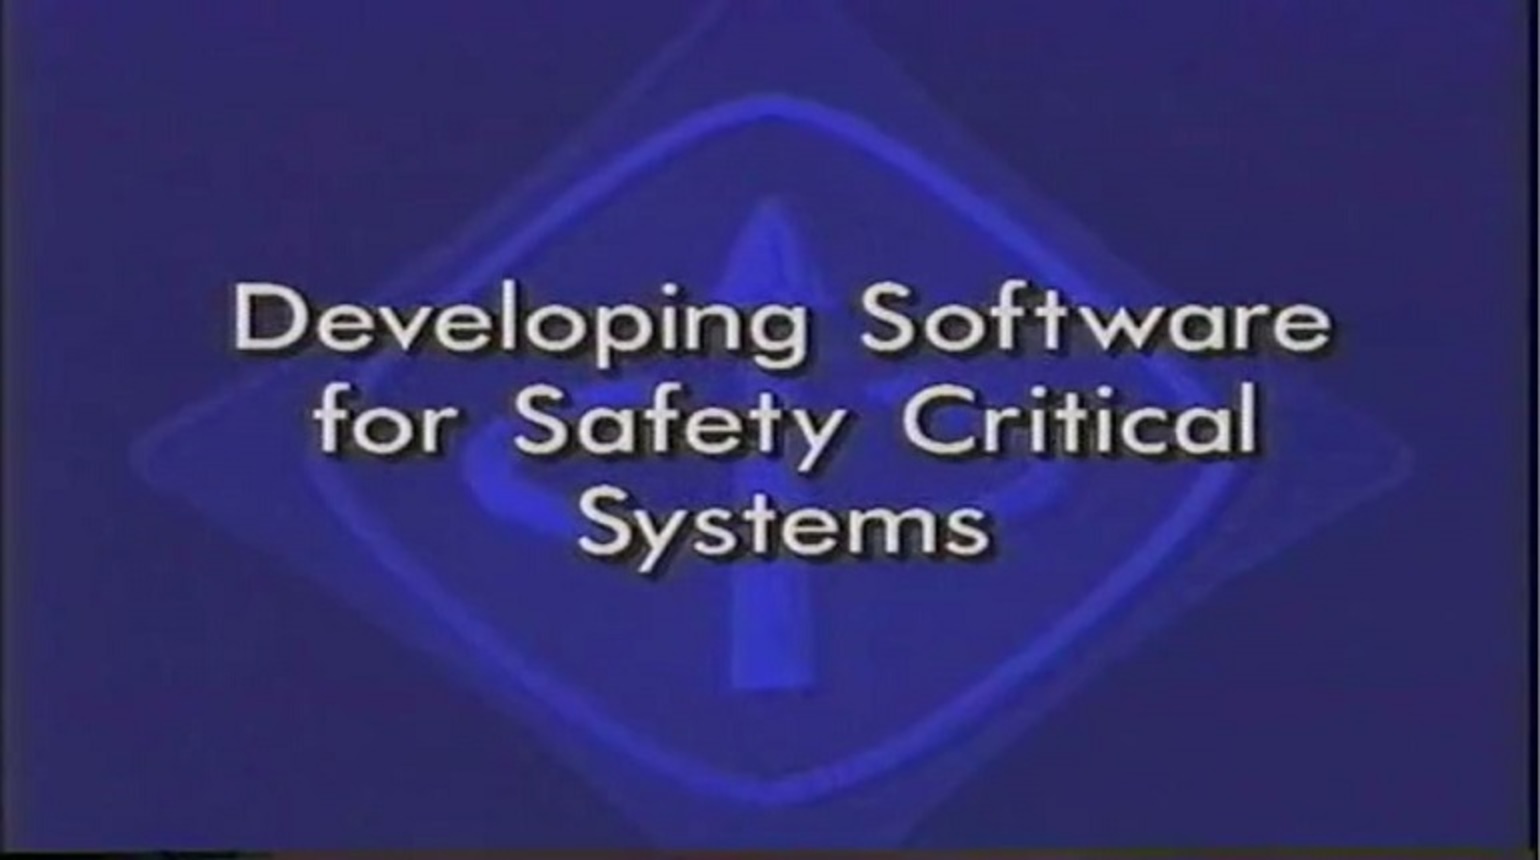 Developing Software for Safety Critical Systems